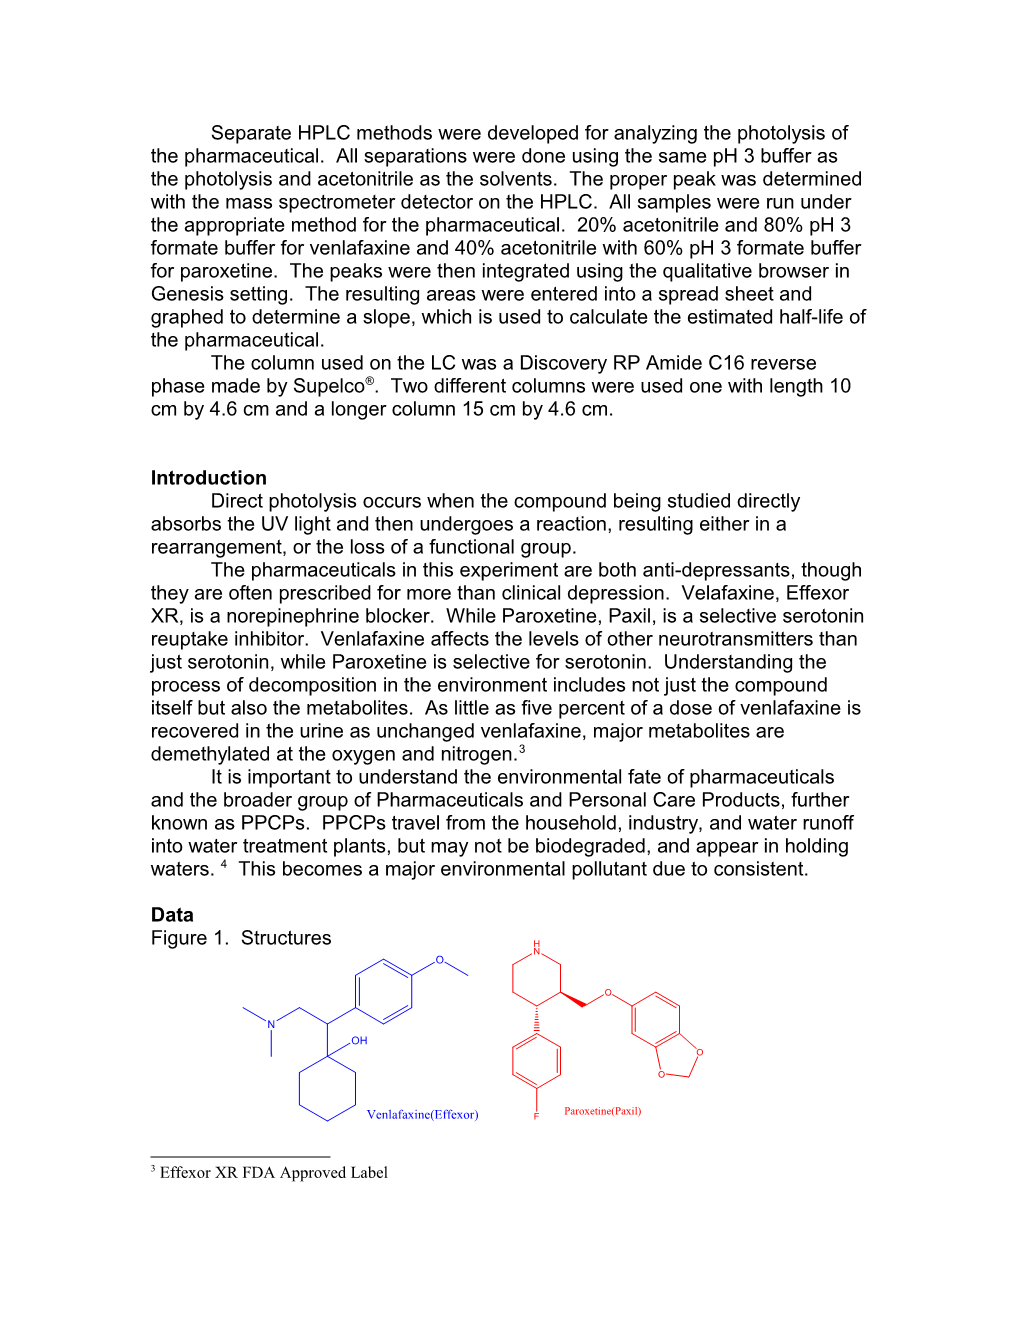 Photolysis of Venlafaxine and Paroxetine in Aqueous Solutions